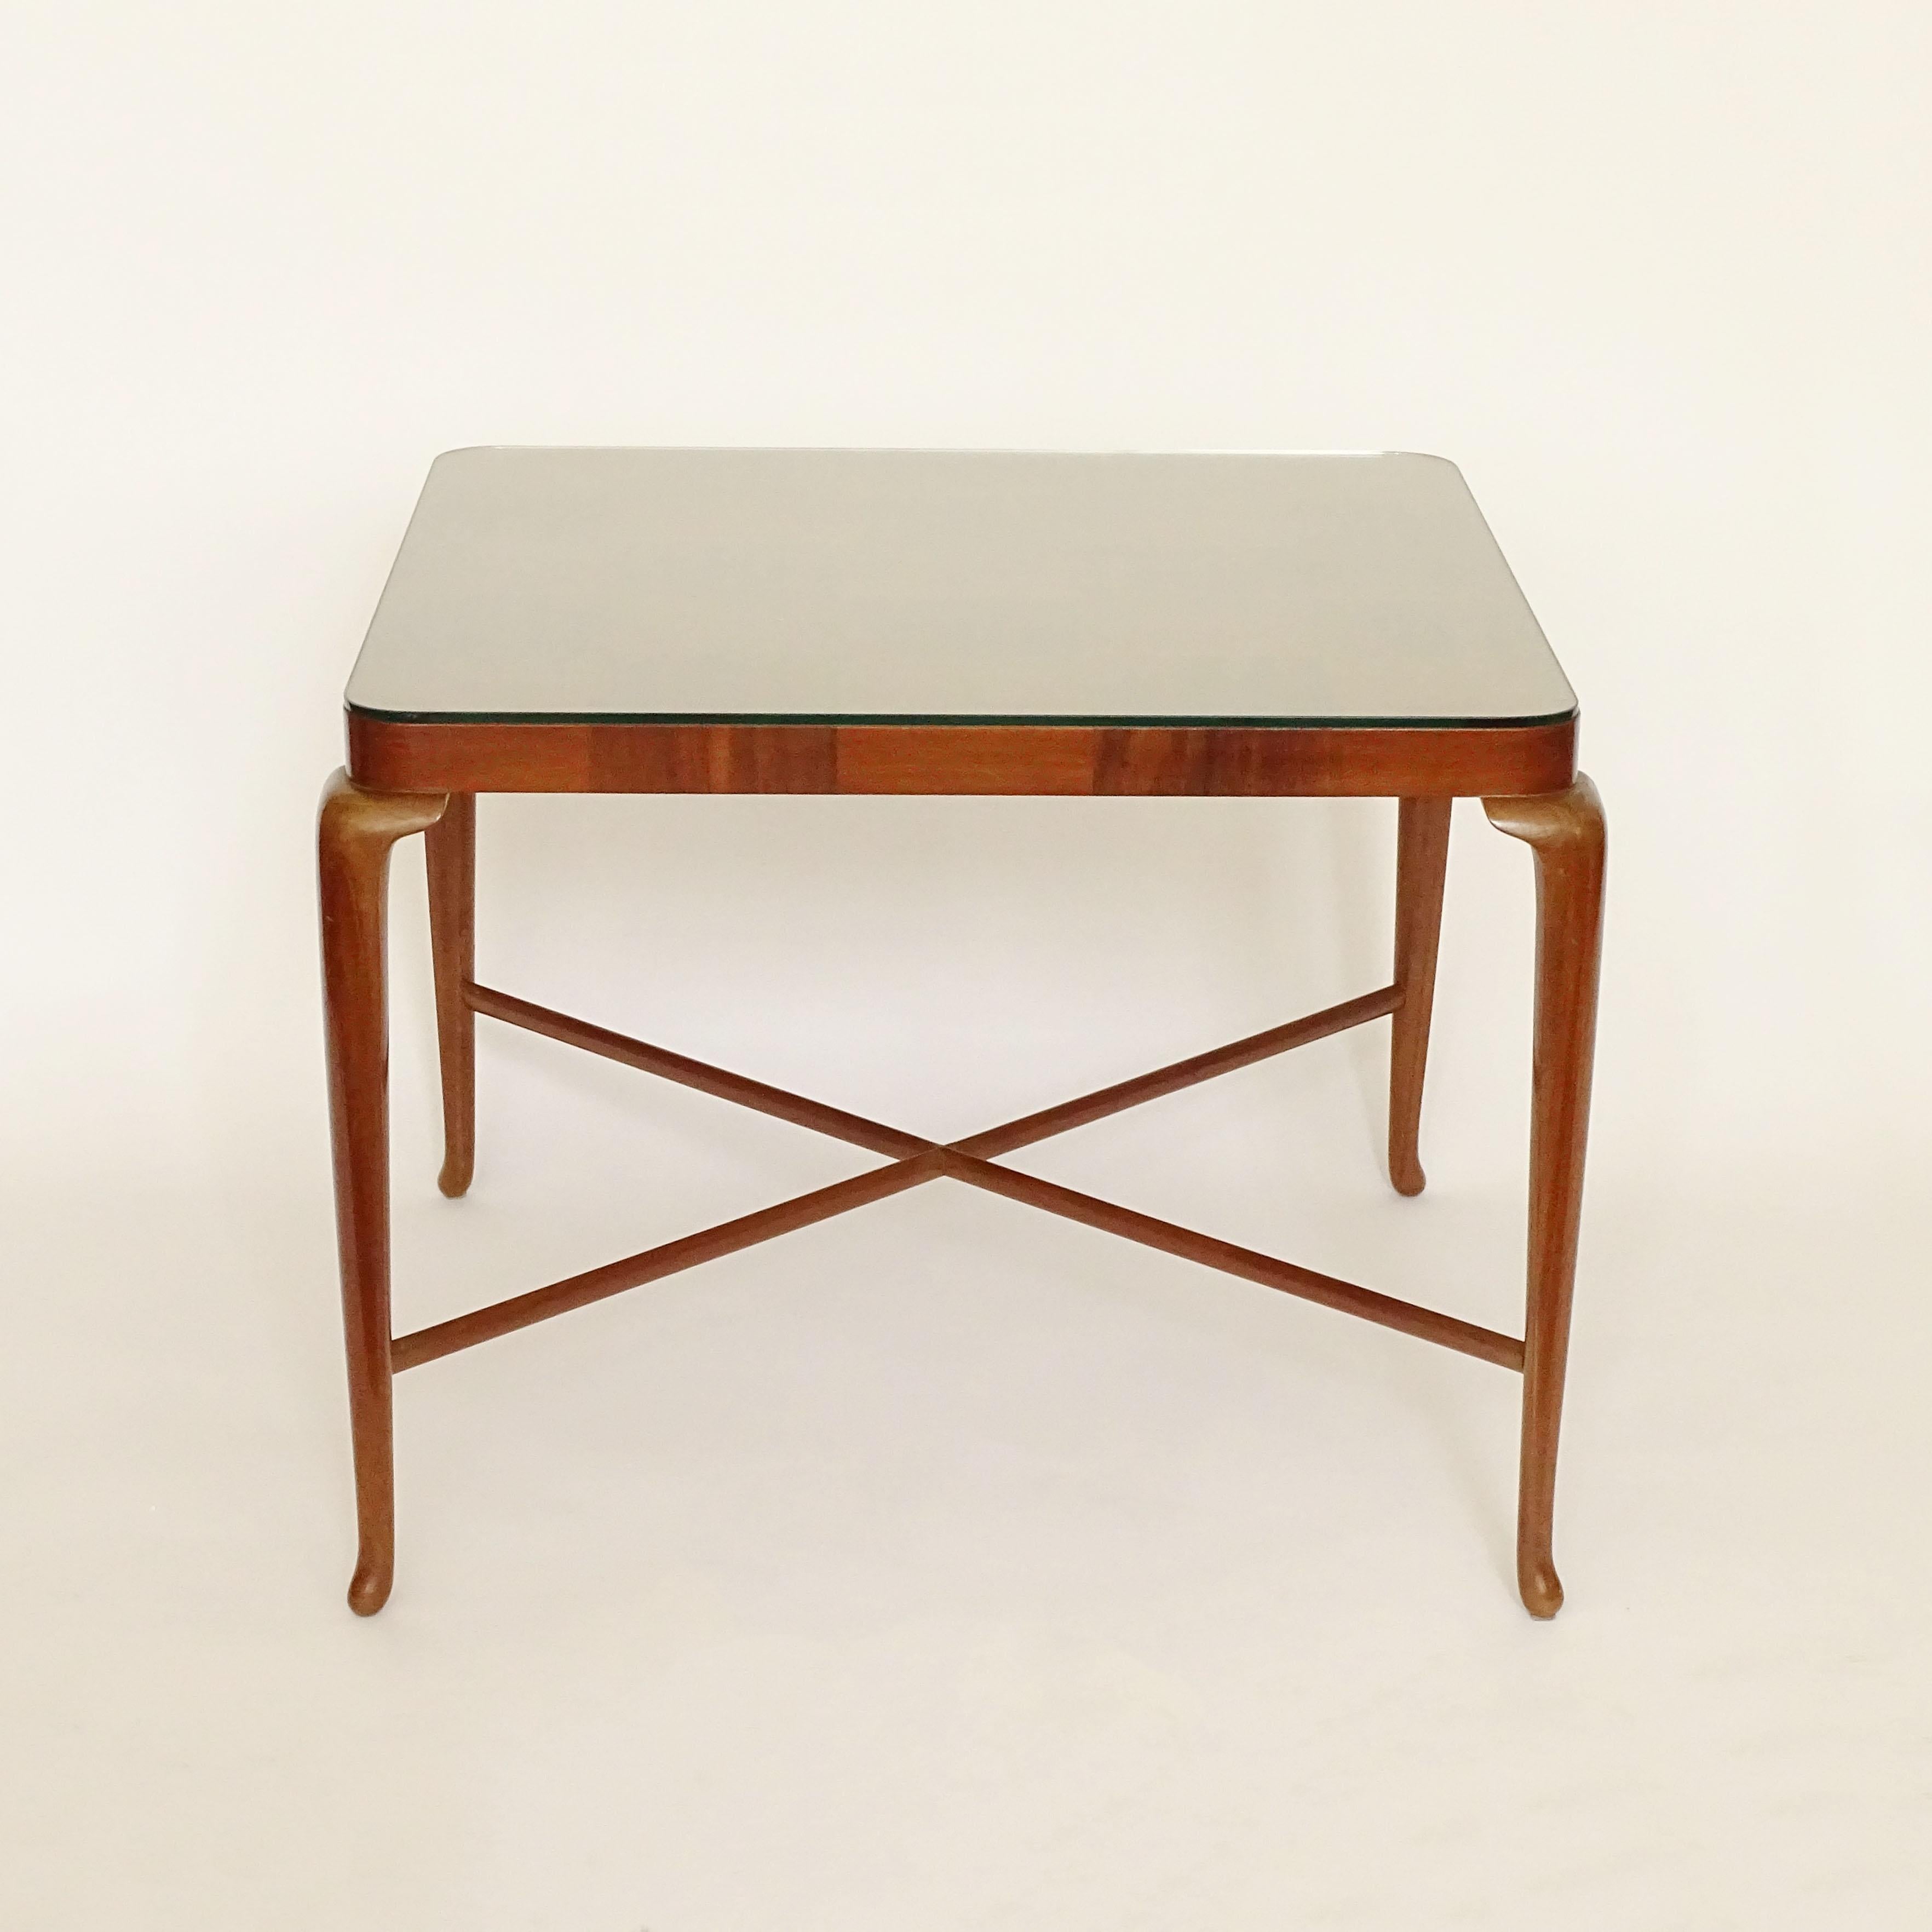 Paolo Buffa Wooden Coffee Table with Squares Top, Italy, 1940s For Sale 1